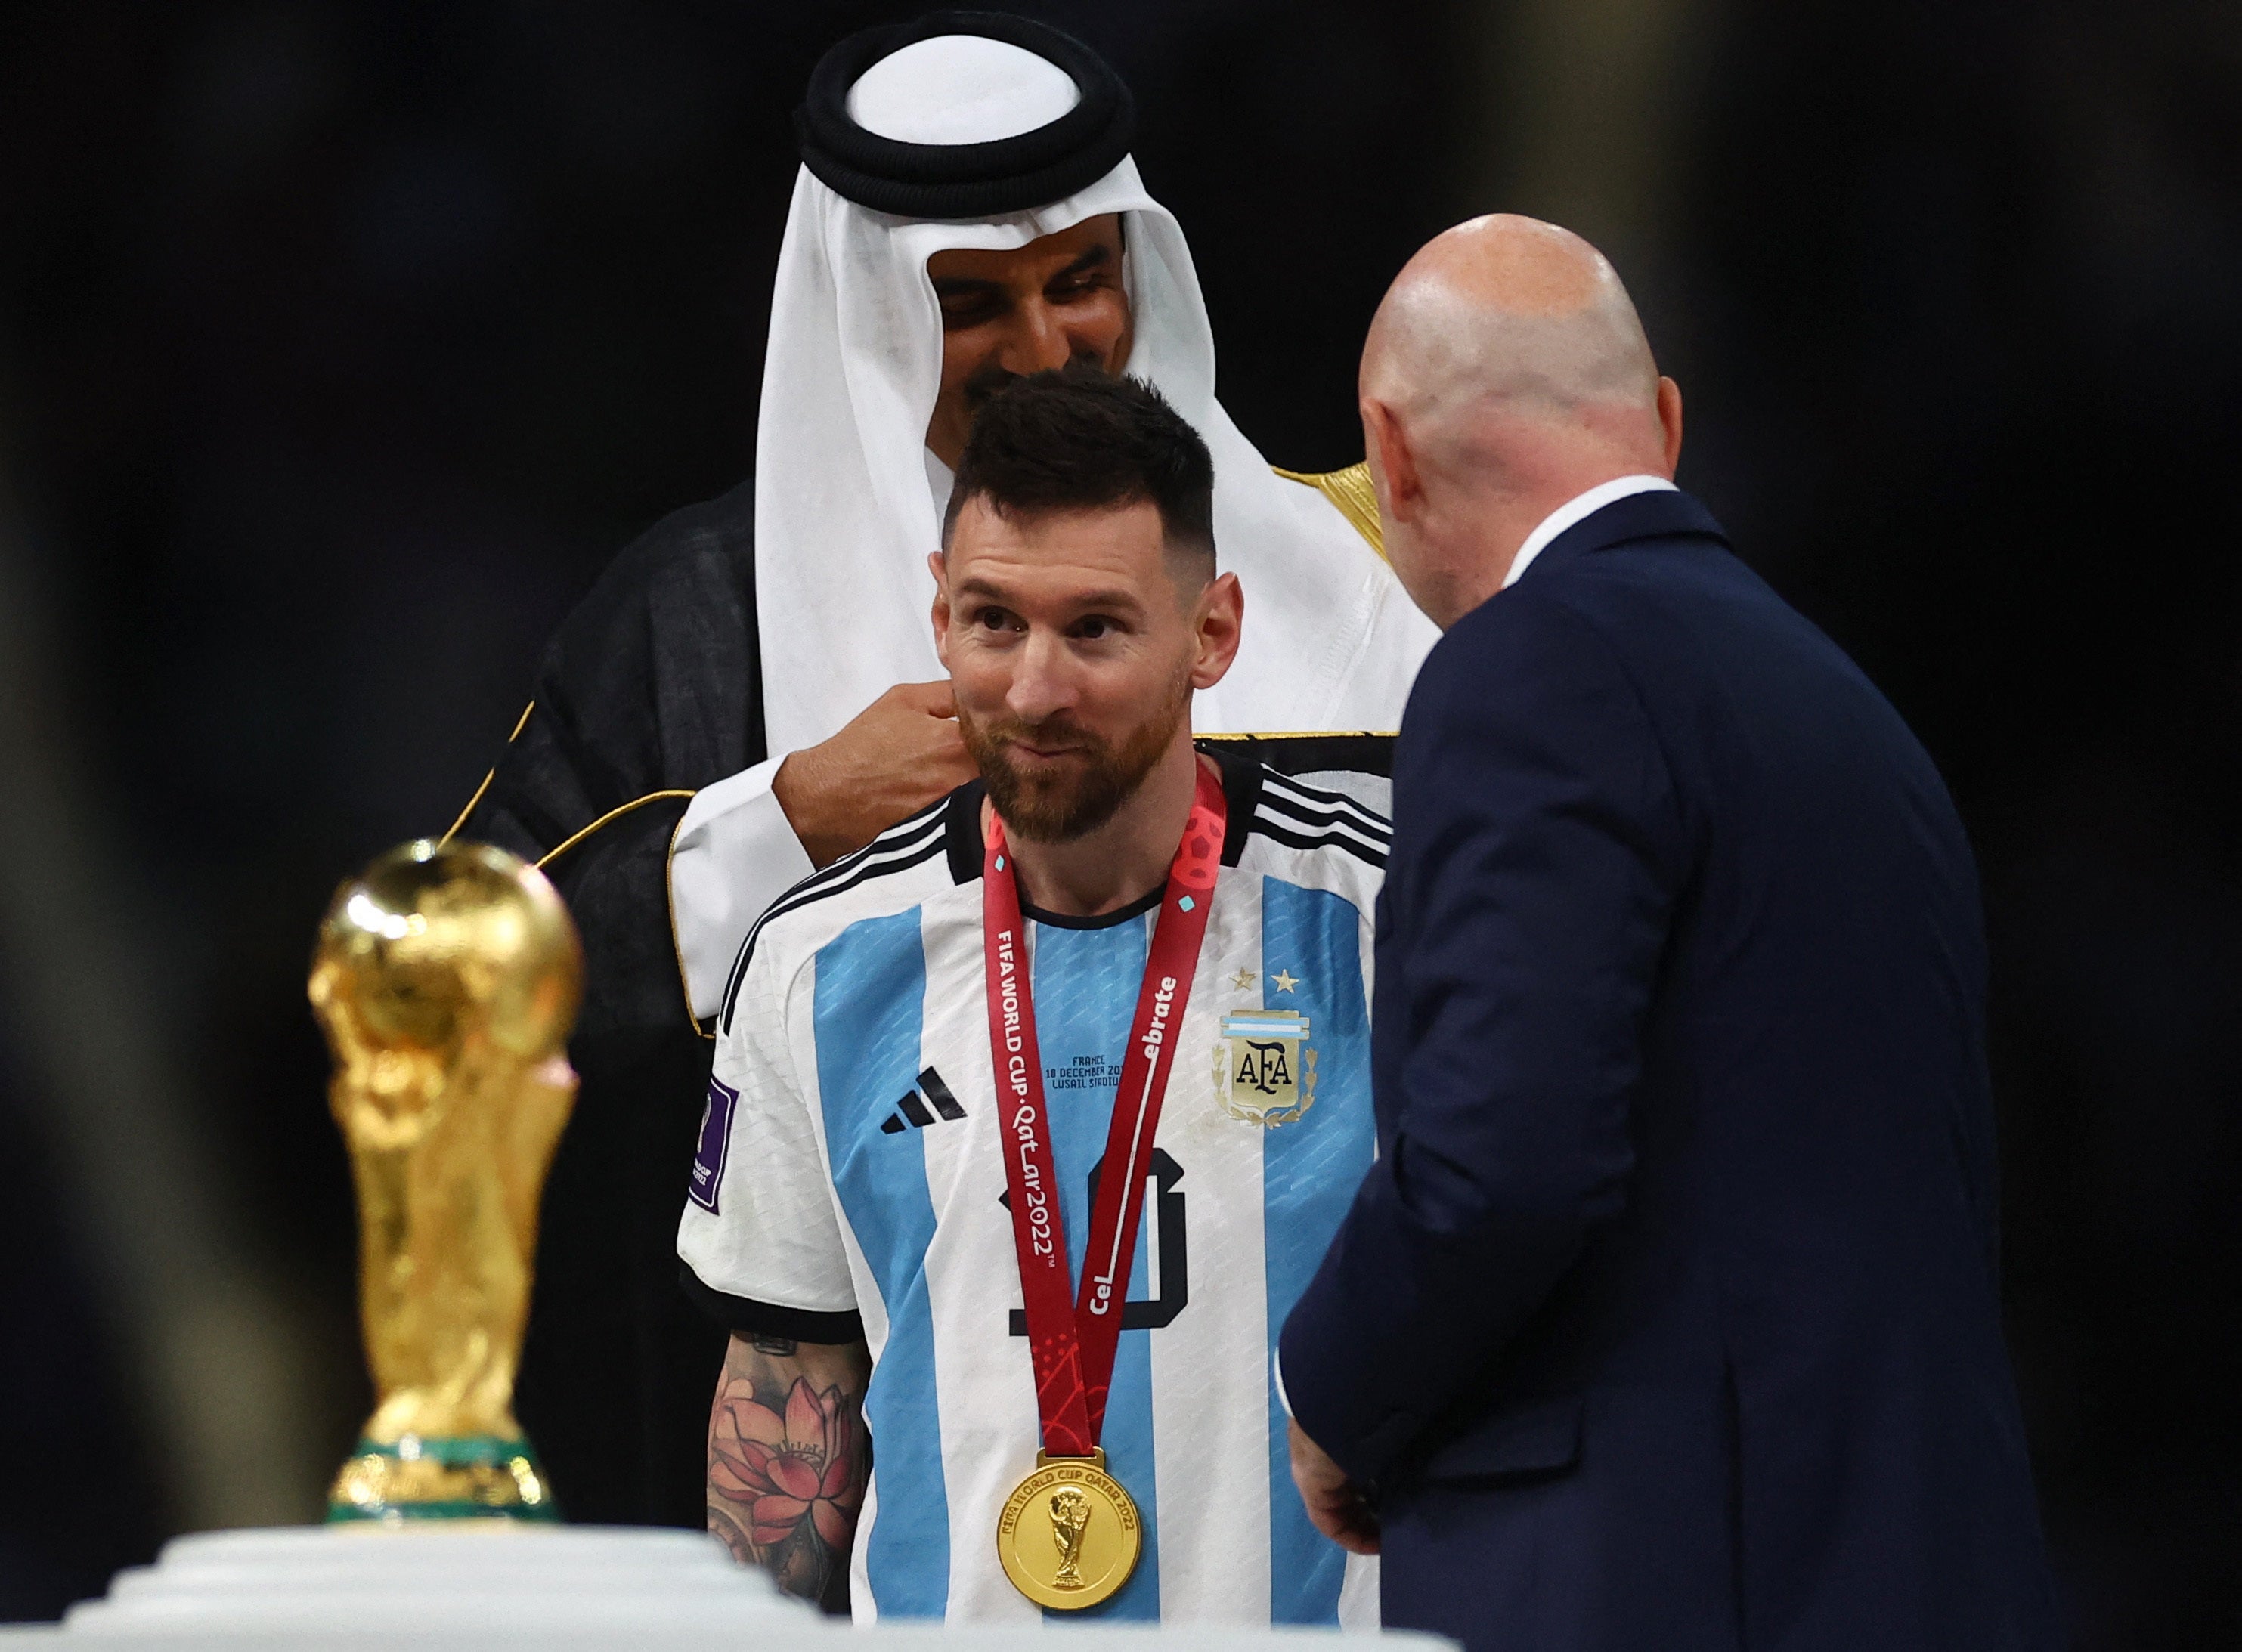 A robe is put on Lionel Messi by Emir of Qatar Sheikh Tamim bin Hamad Al Thani and Gianni Infantino during the trophy presentation